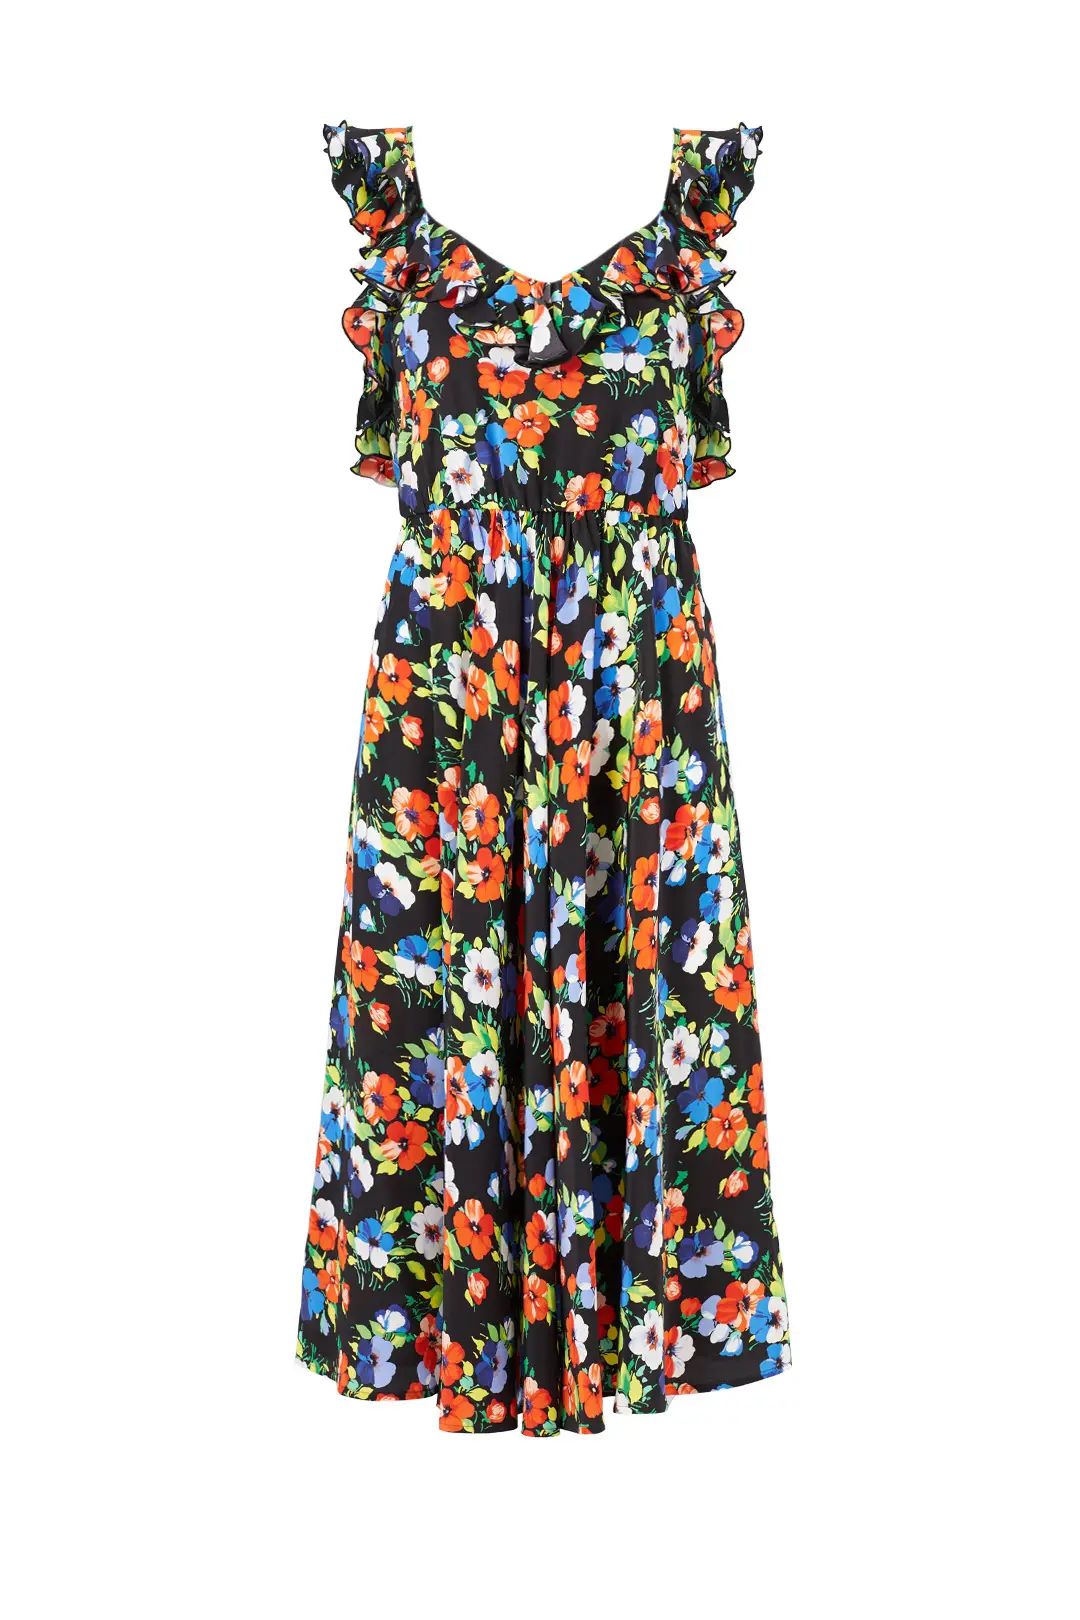 MSGM Bright Floral Ruffle Dress | Rent The Runway